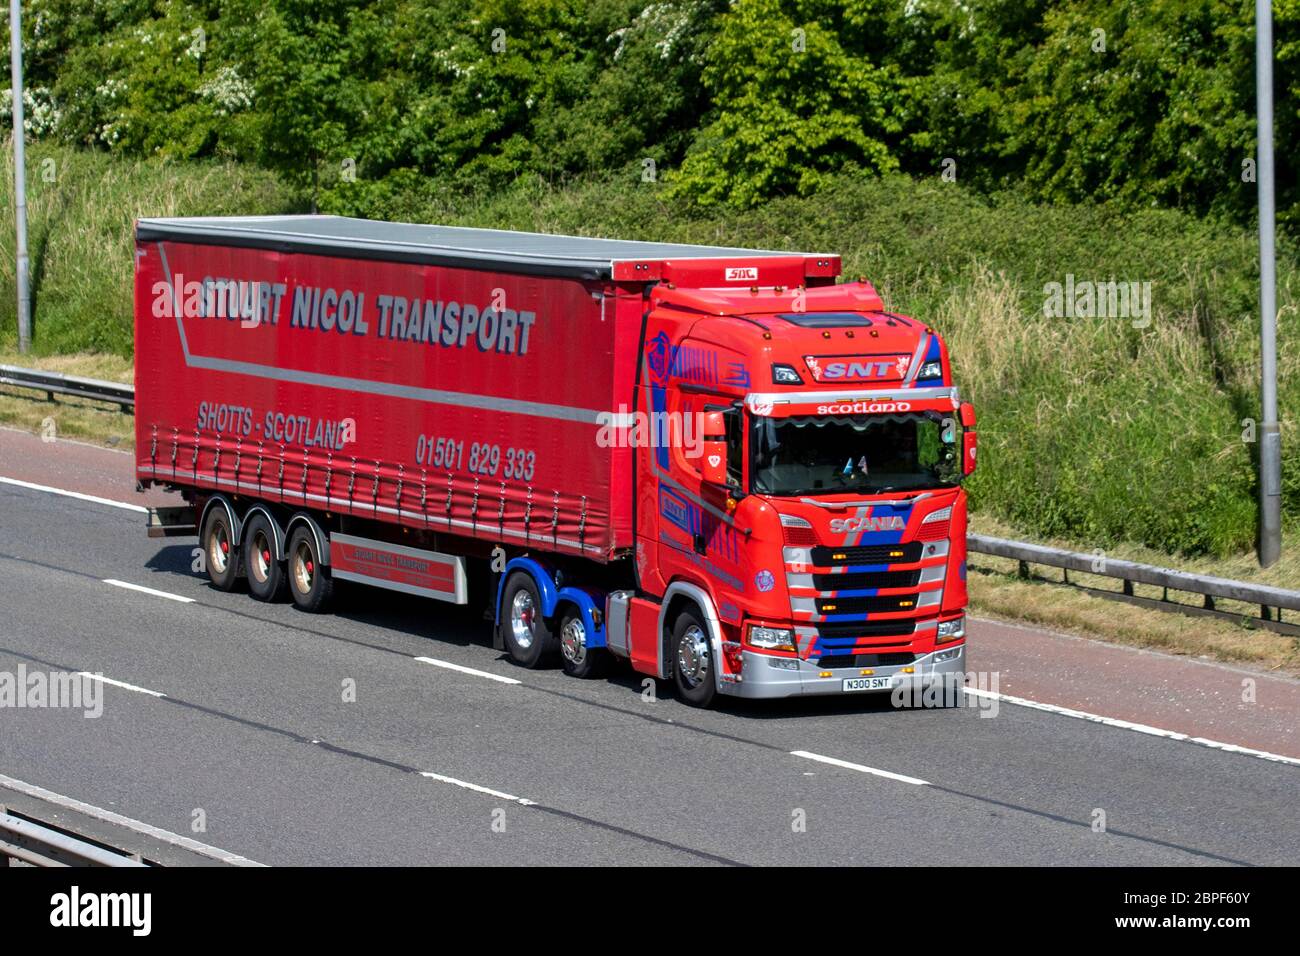 Stuart Nicol Transport SNT SCOTLAND; Haulage delivery trucks, lorry, transportation, red truck, cargo carrier, Scania vehicle, European commercial transport, industry, M6 at Manchester, UK Stock Photo